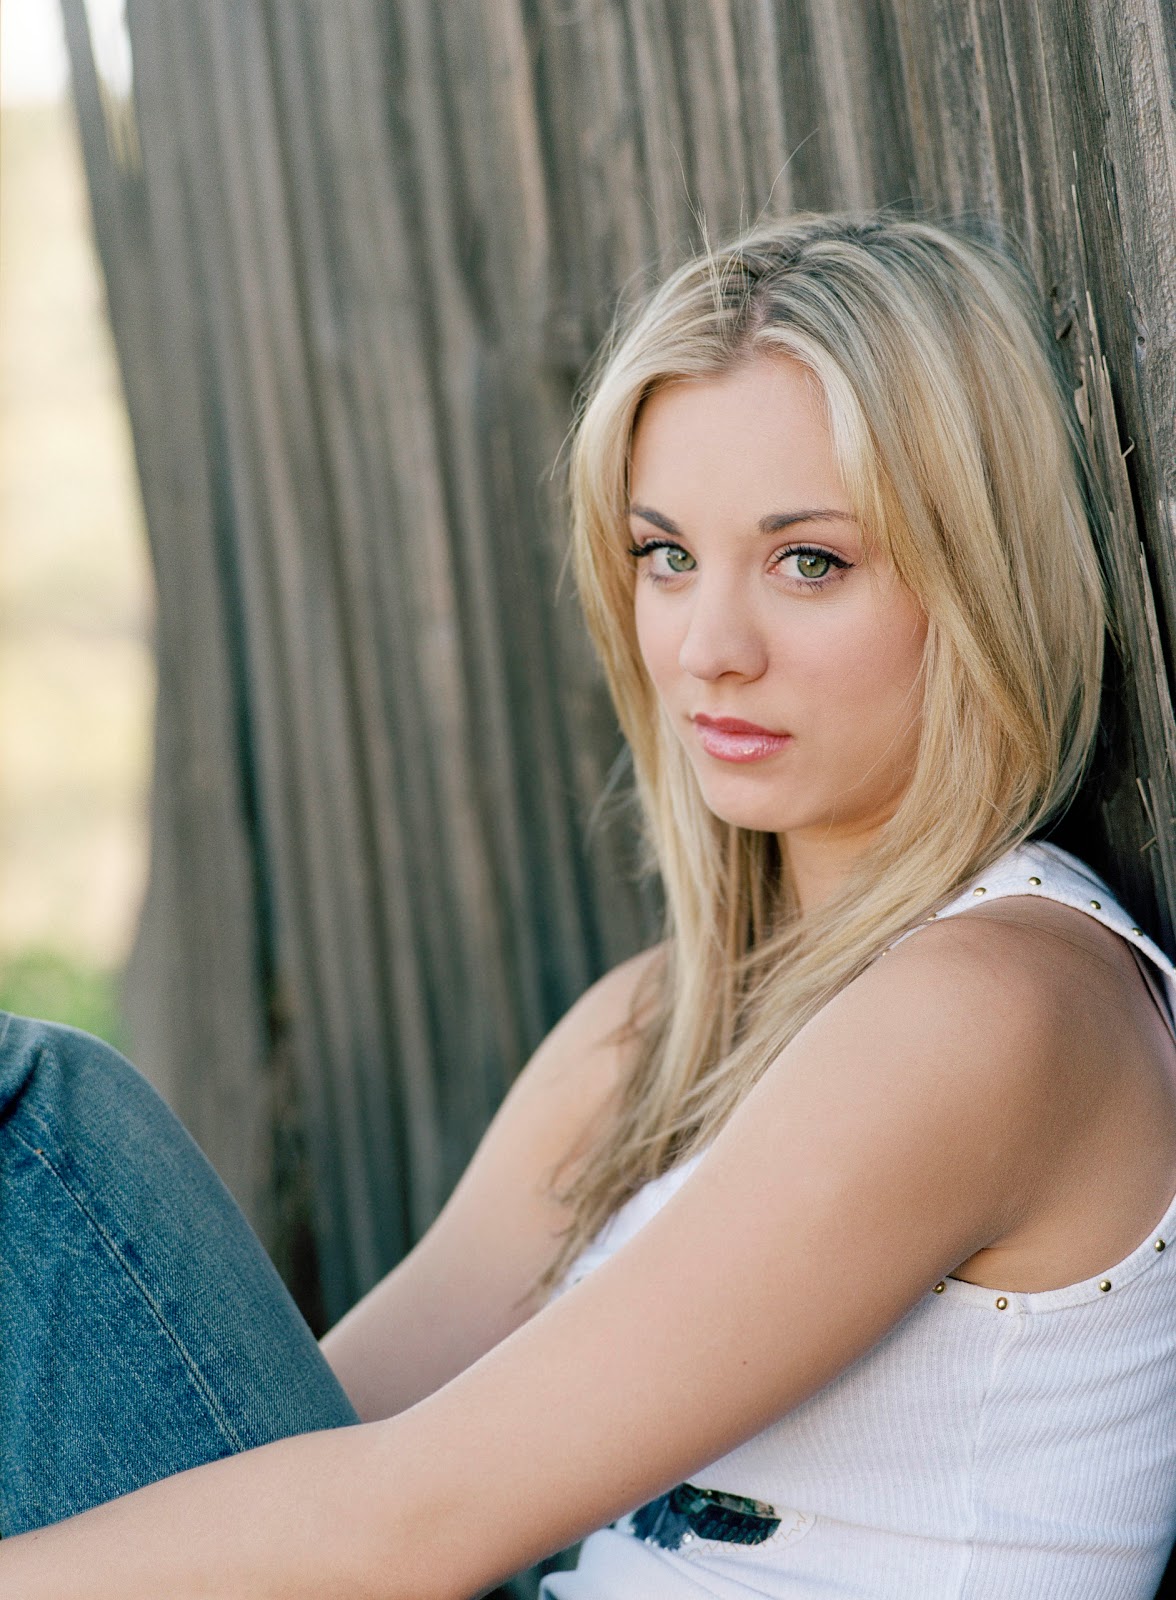 kaley cuoco wallpaper,hair,blond,hairstyle,beauty,chin